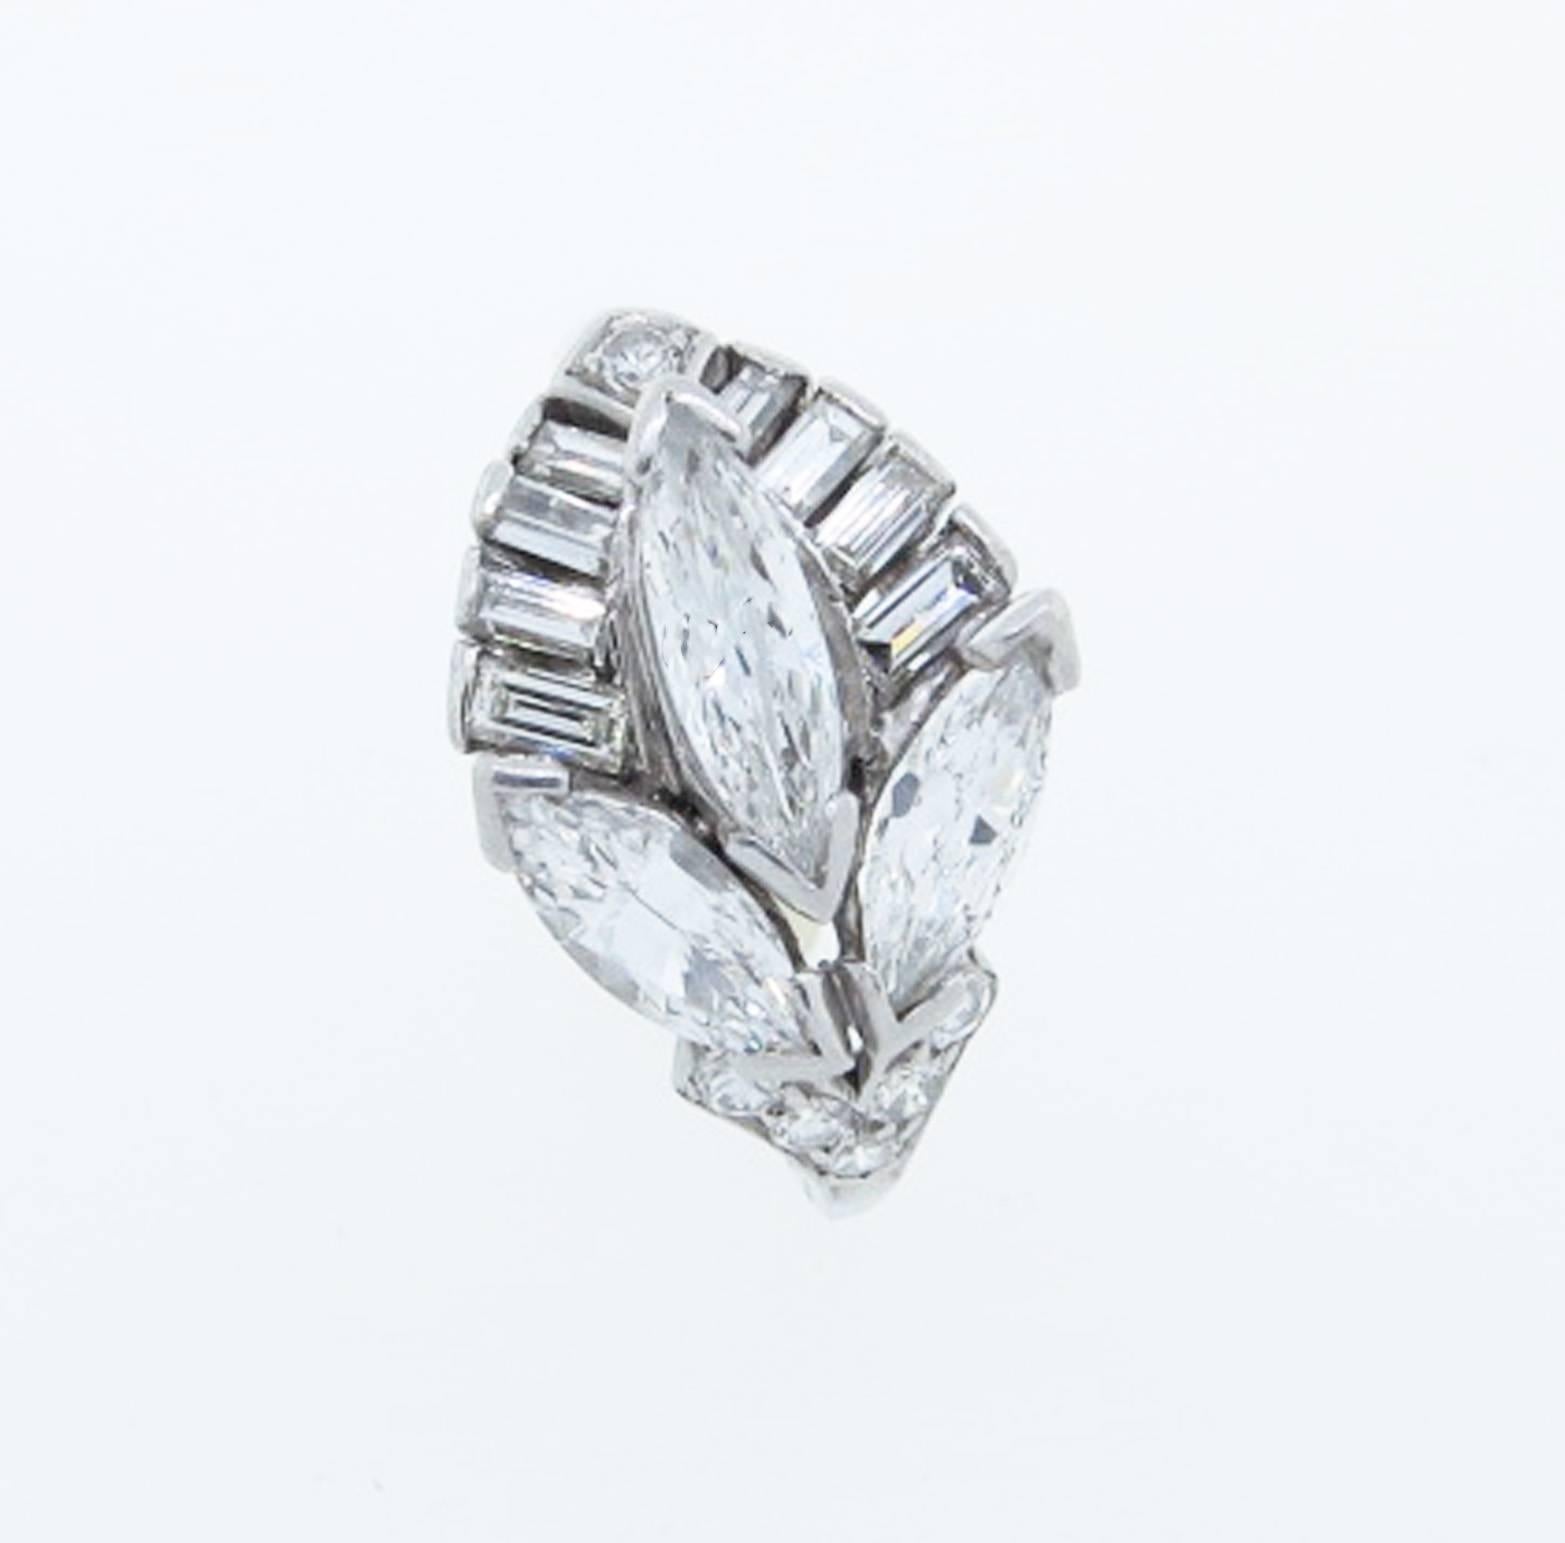 Powerful leaf design platinum mount ring circa 1950. The ring is set with a center marquise cut diamond weighing approx .50 cts., two side marquise cuts,  8 baguettes and 6 round cut diamonds totaling an additional 1.05cts. The diamonds grade Vs